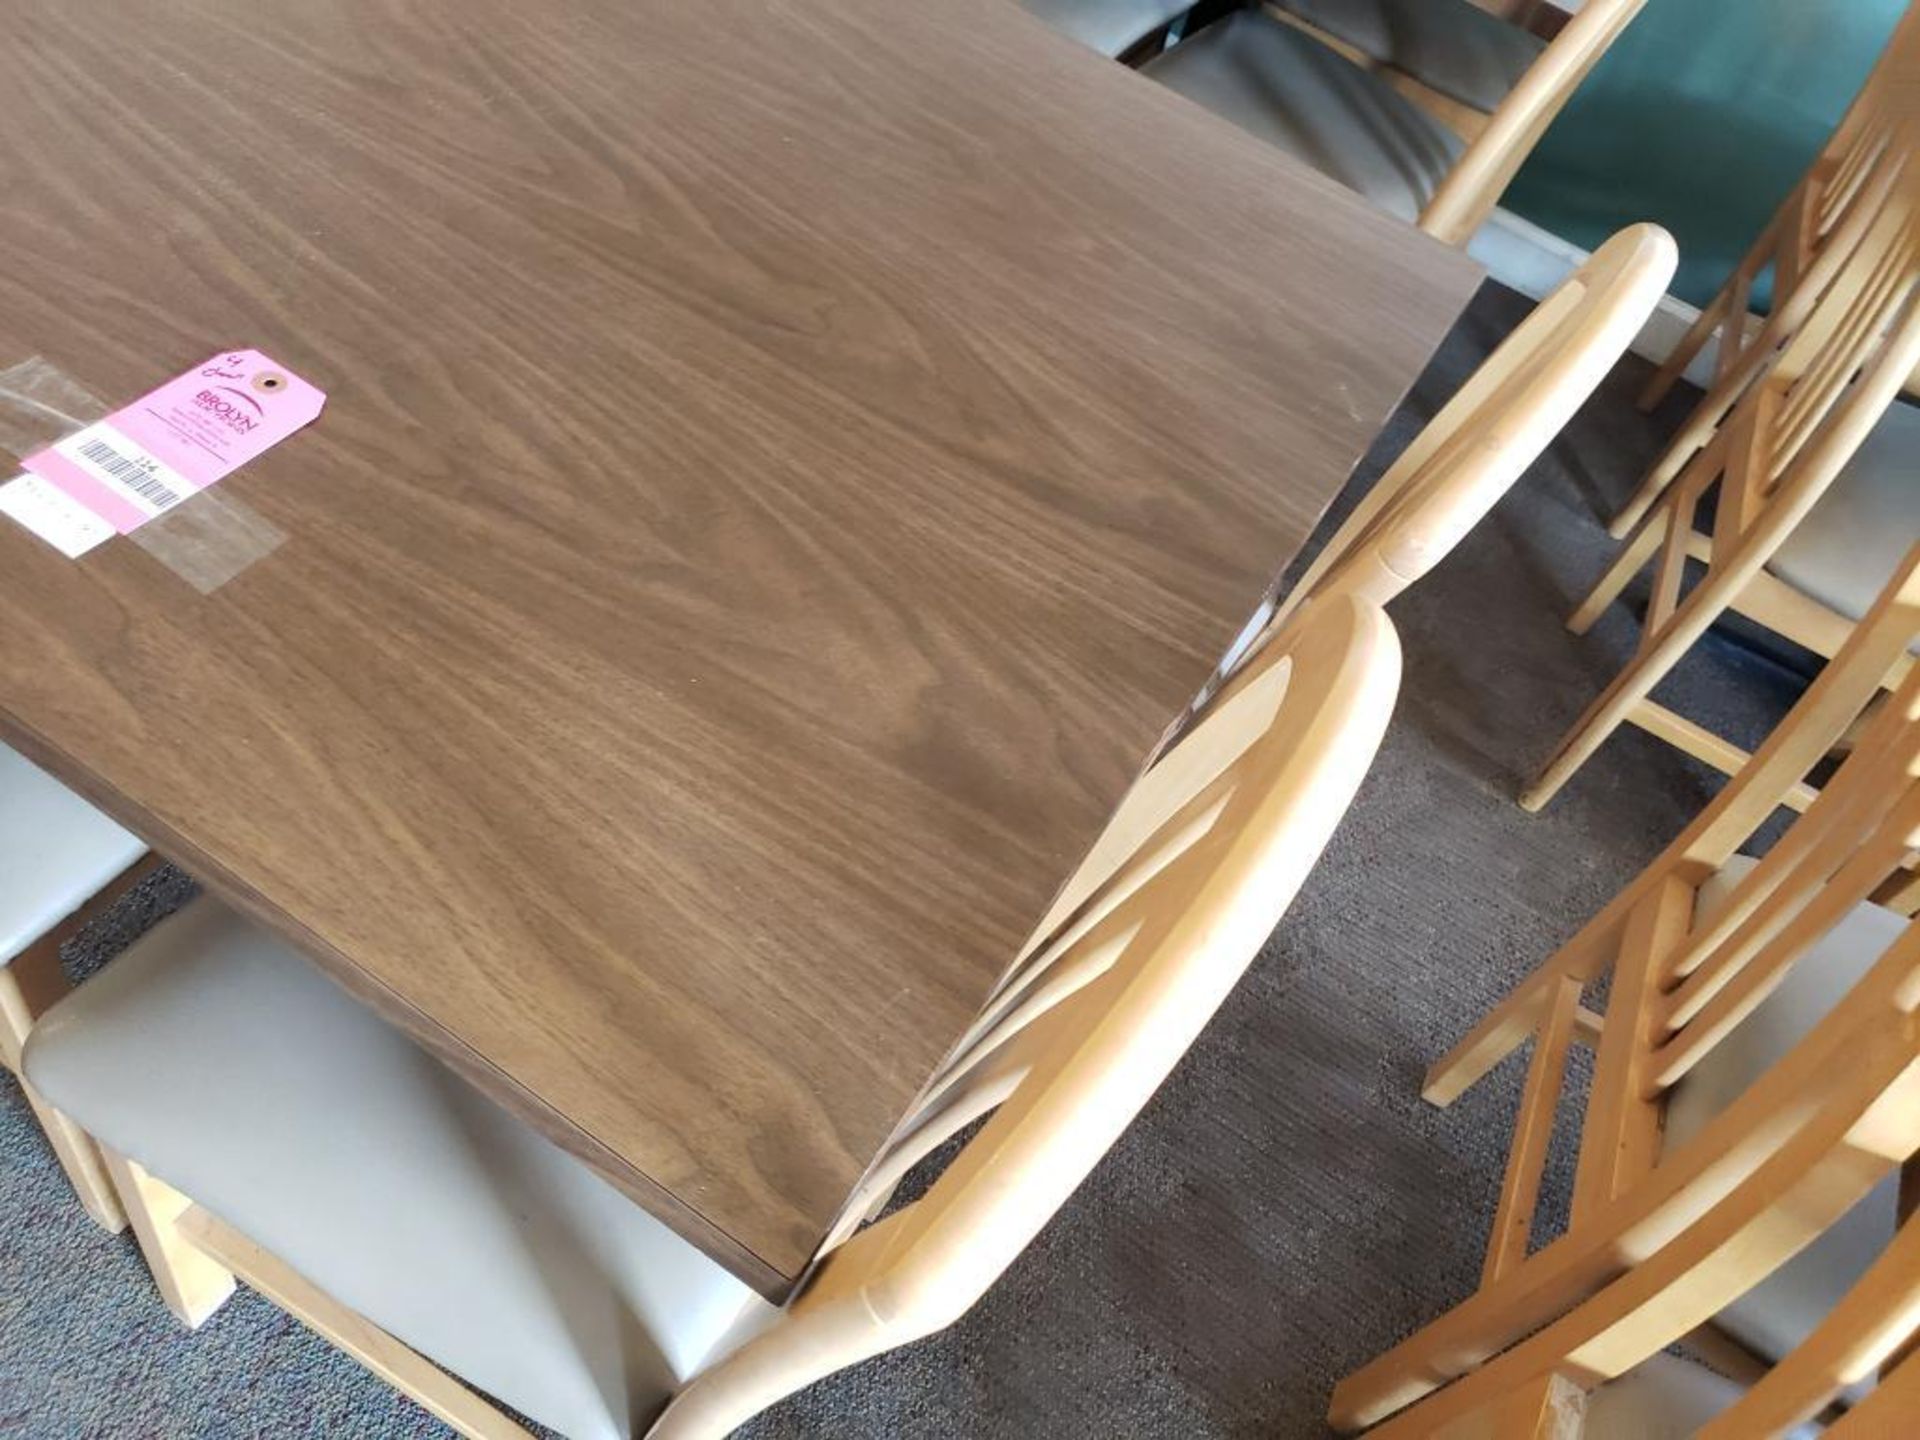 Table with 4 chairs. Table size 35in x 35in. - Image 3 of 5